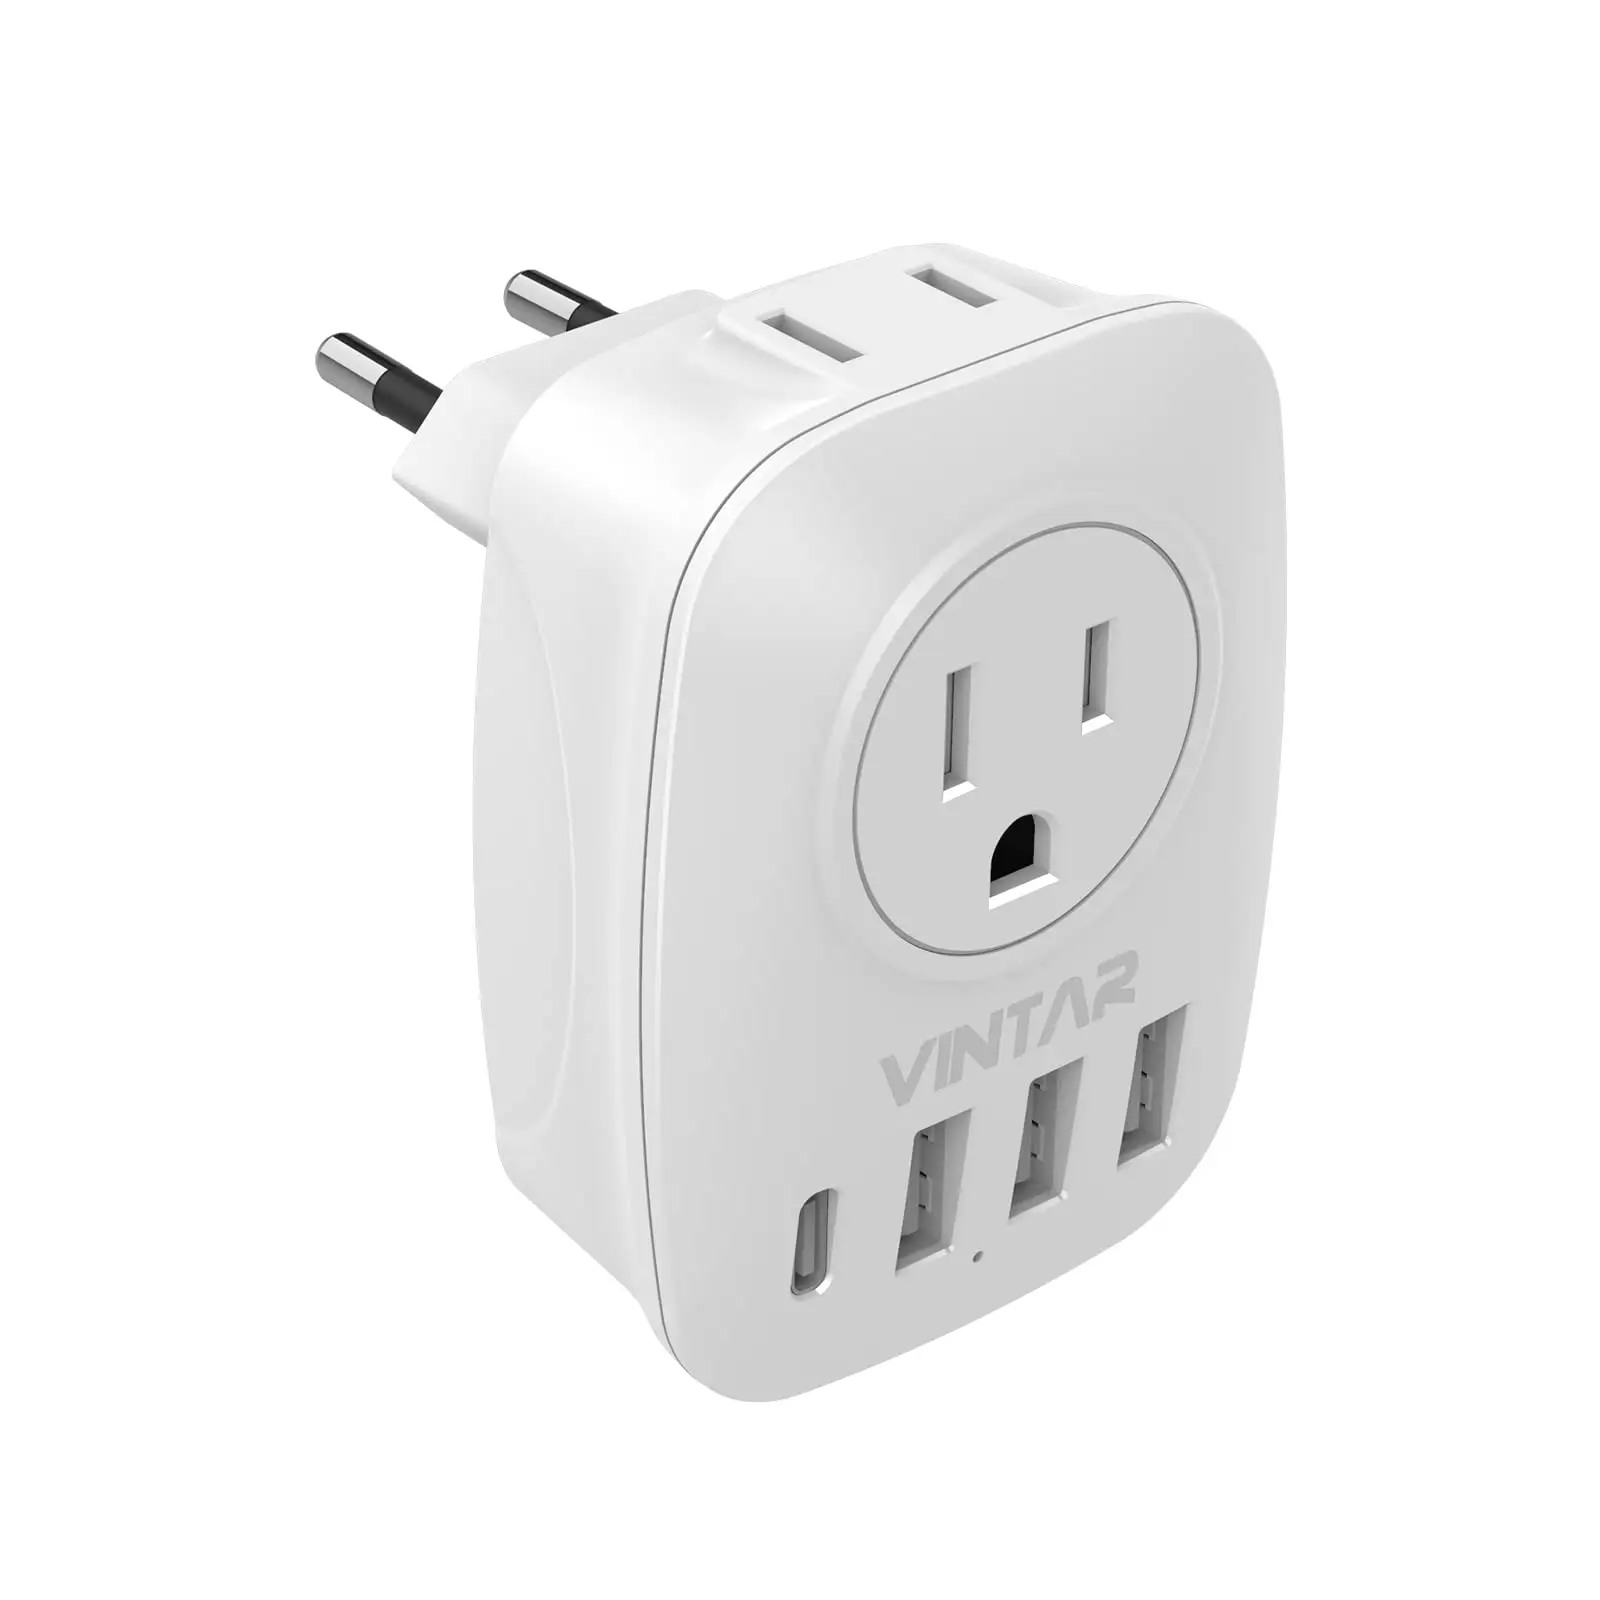 VINTAR 6 in 1 European Travel Plug Adapter US to Europe Power Plug Adapter with 3 USB and 1 USB-C